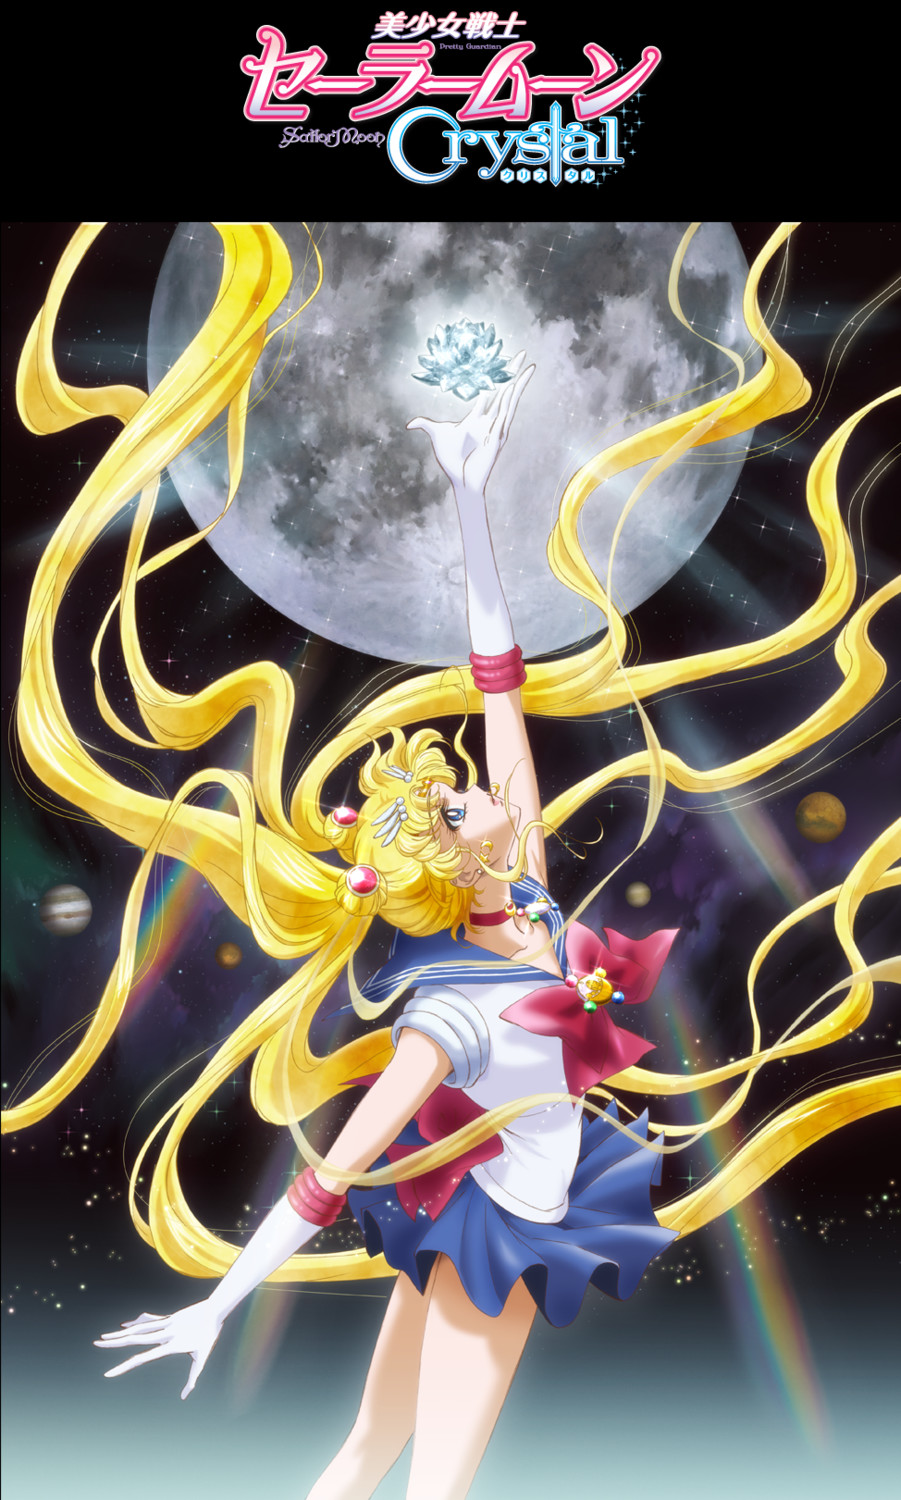 2014's New Sailor Moon Crystal Anime's 1st Image, Story Intro Posted Online  - News - Anime News Network